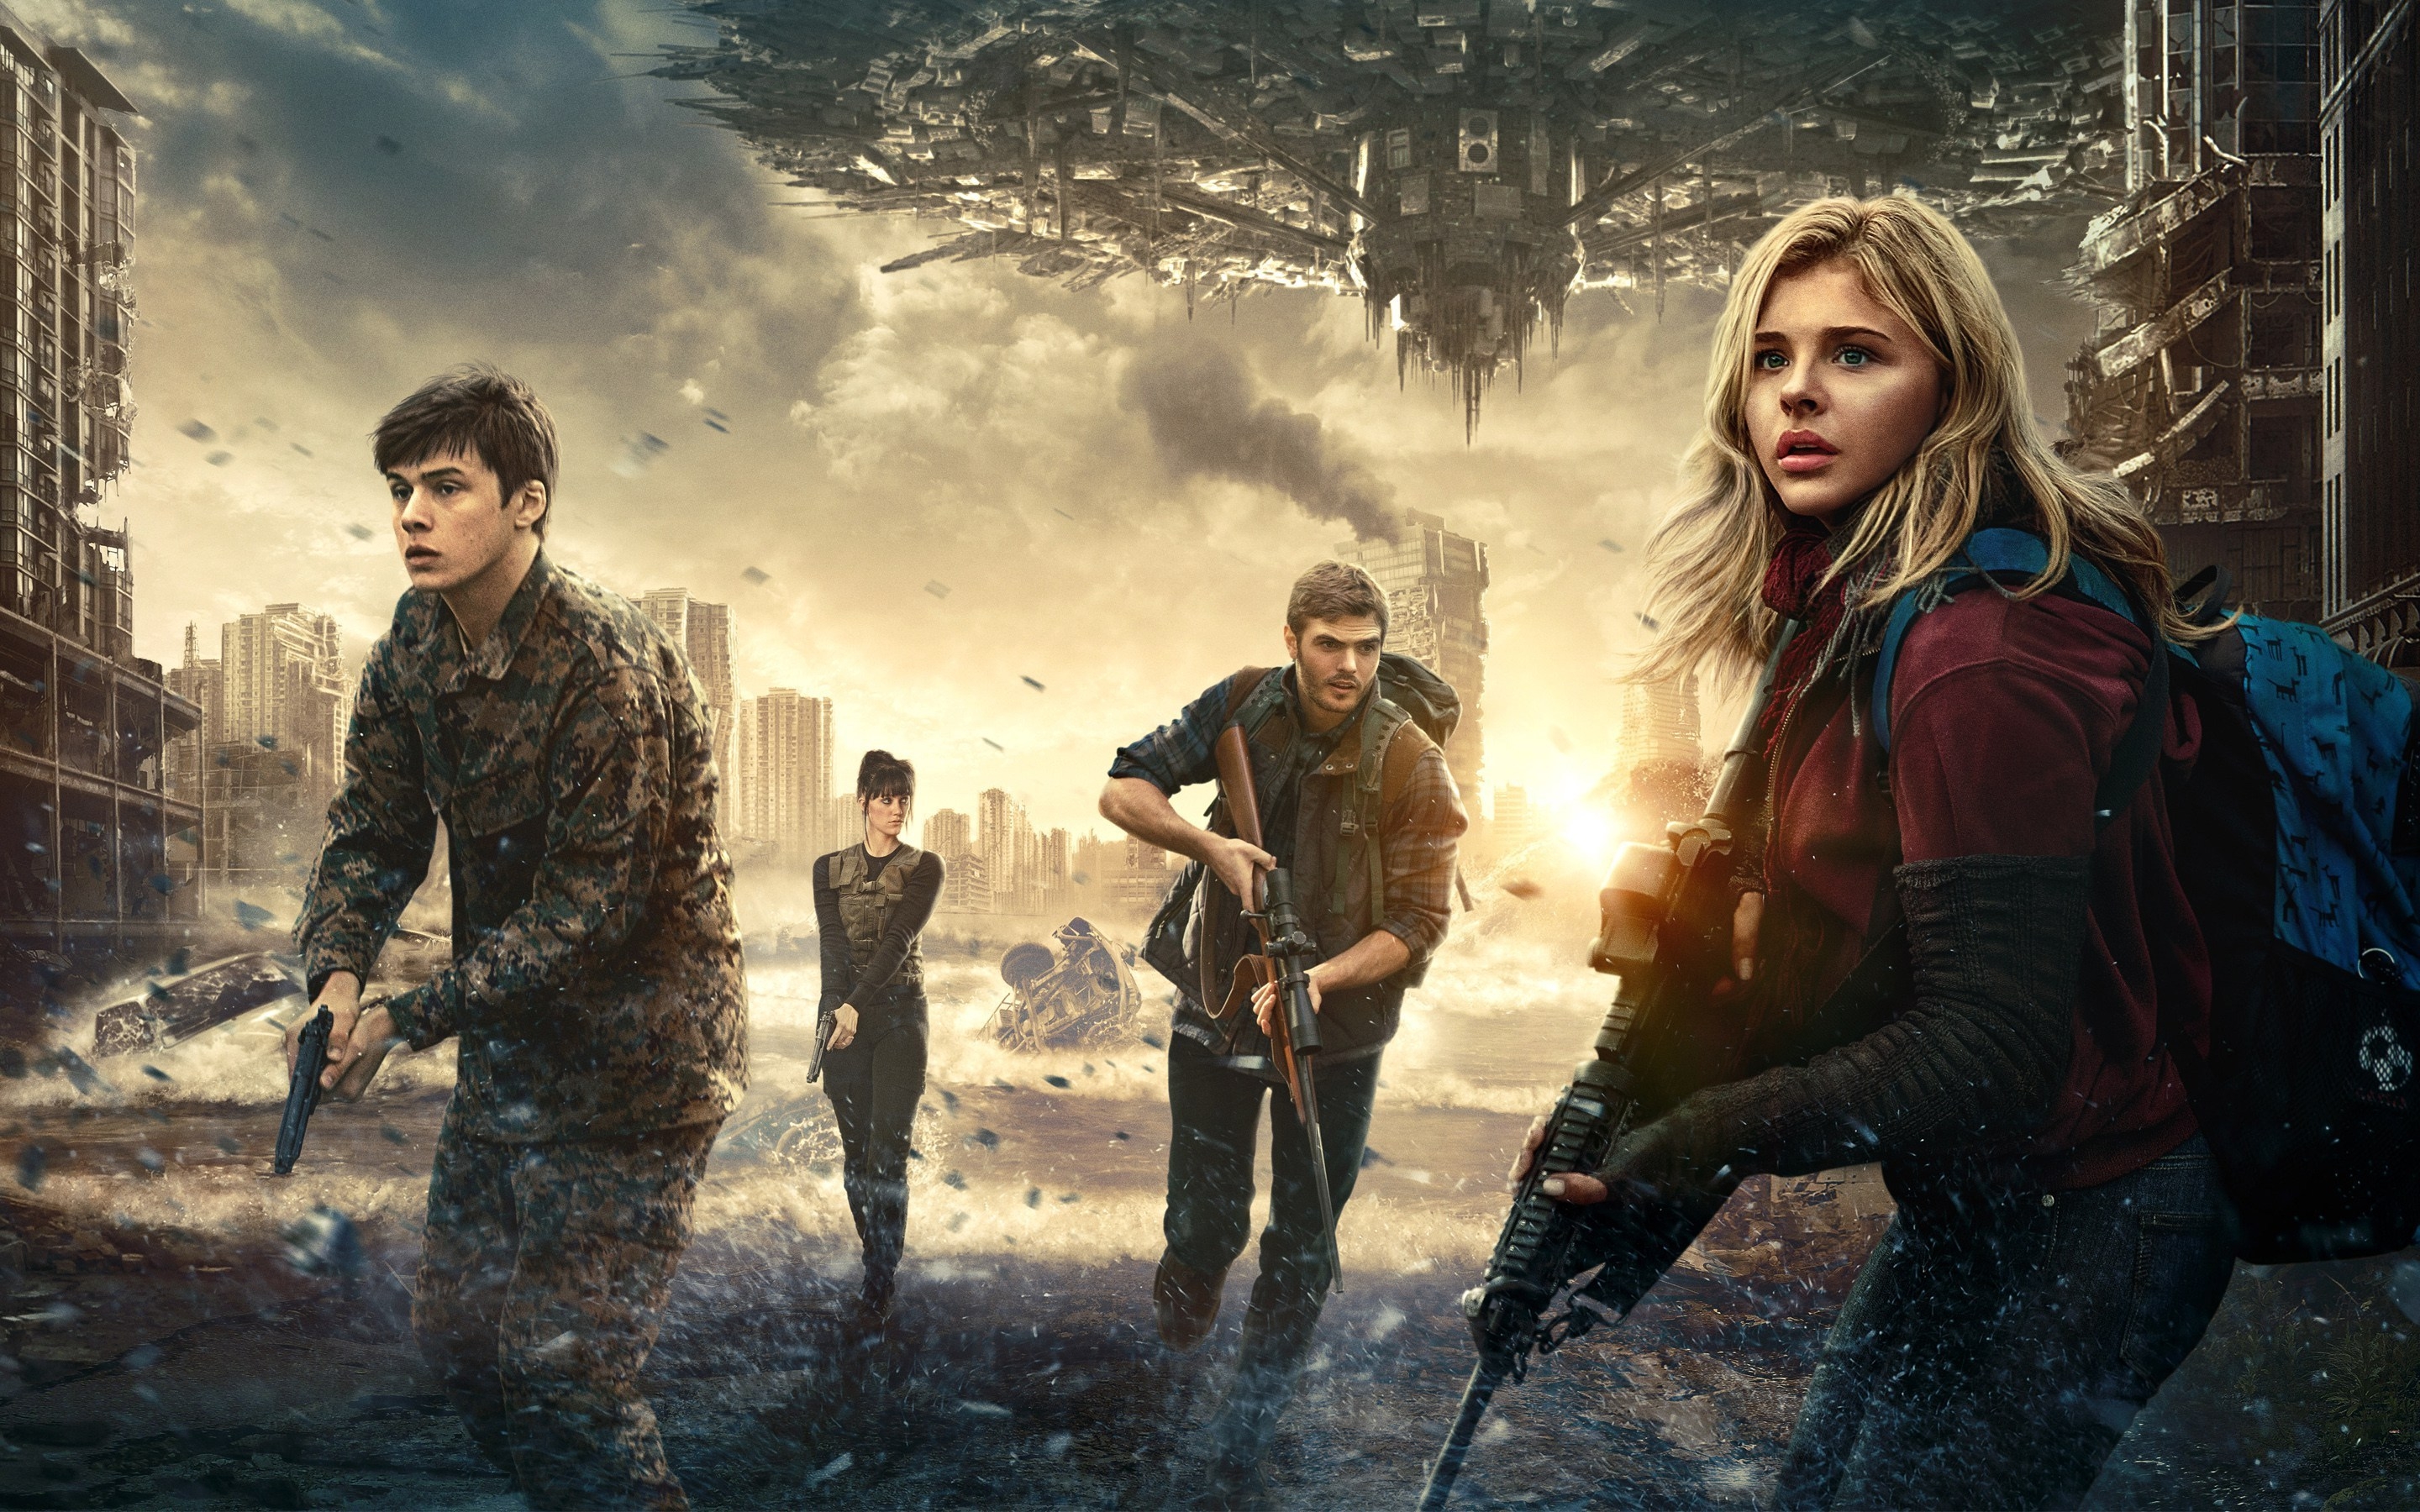 The 5th Wave Film 2016 for 2880 x 1800 Retina Display resolution